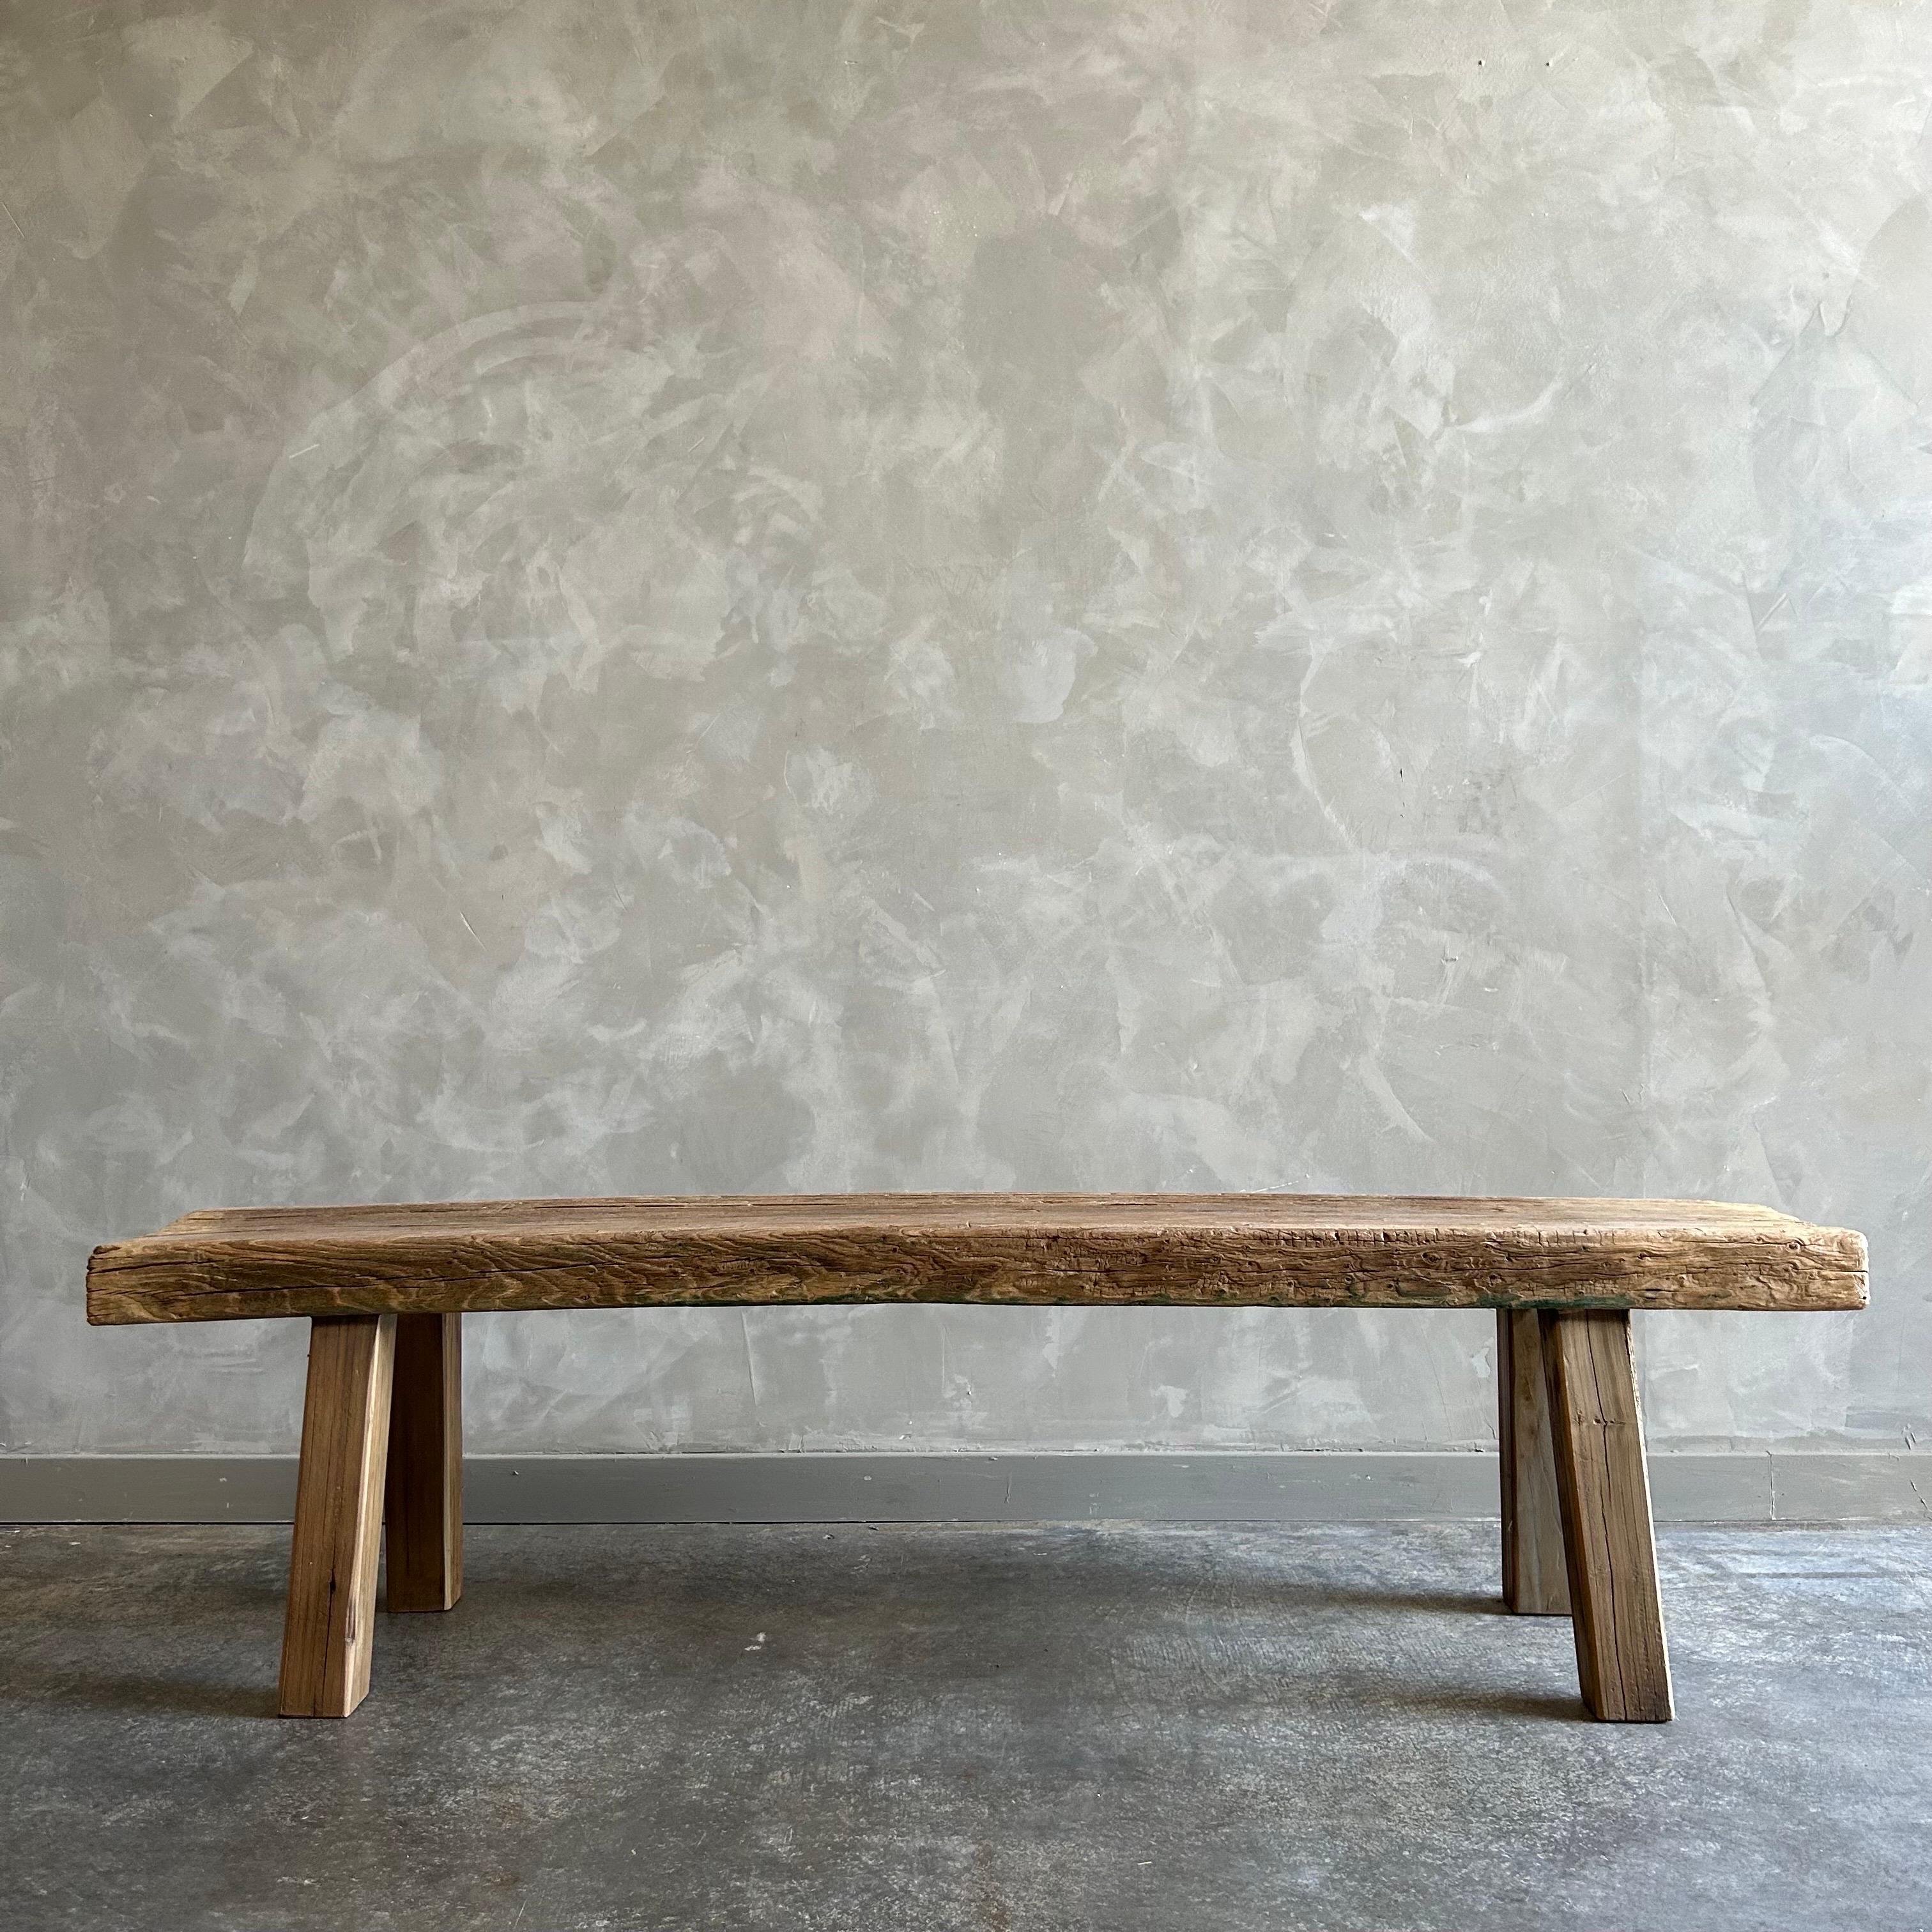 Vintage Elm wood bench 
Thick plank top, square legs. Solid and sturdy, ready for everyday use.
Seat depth of 11